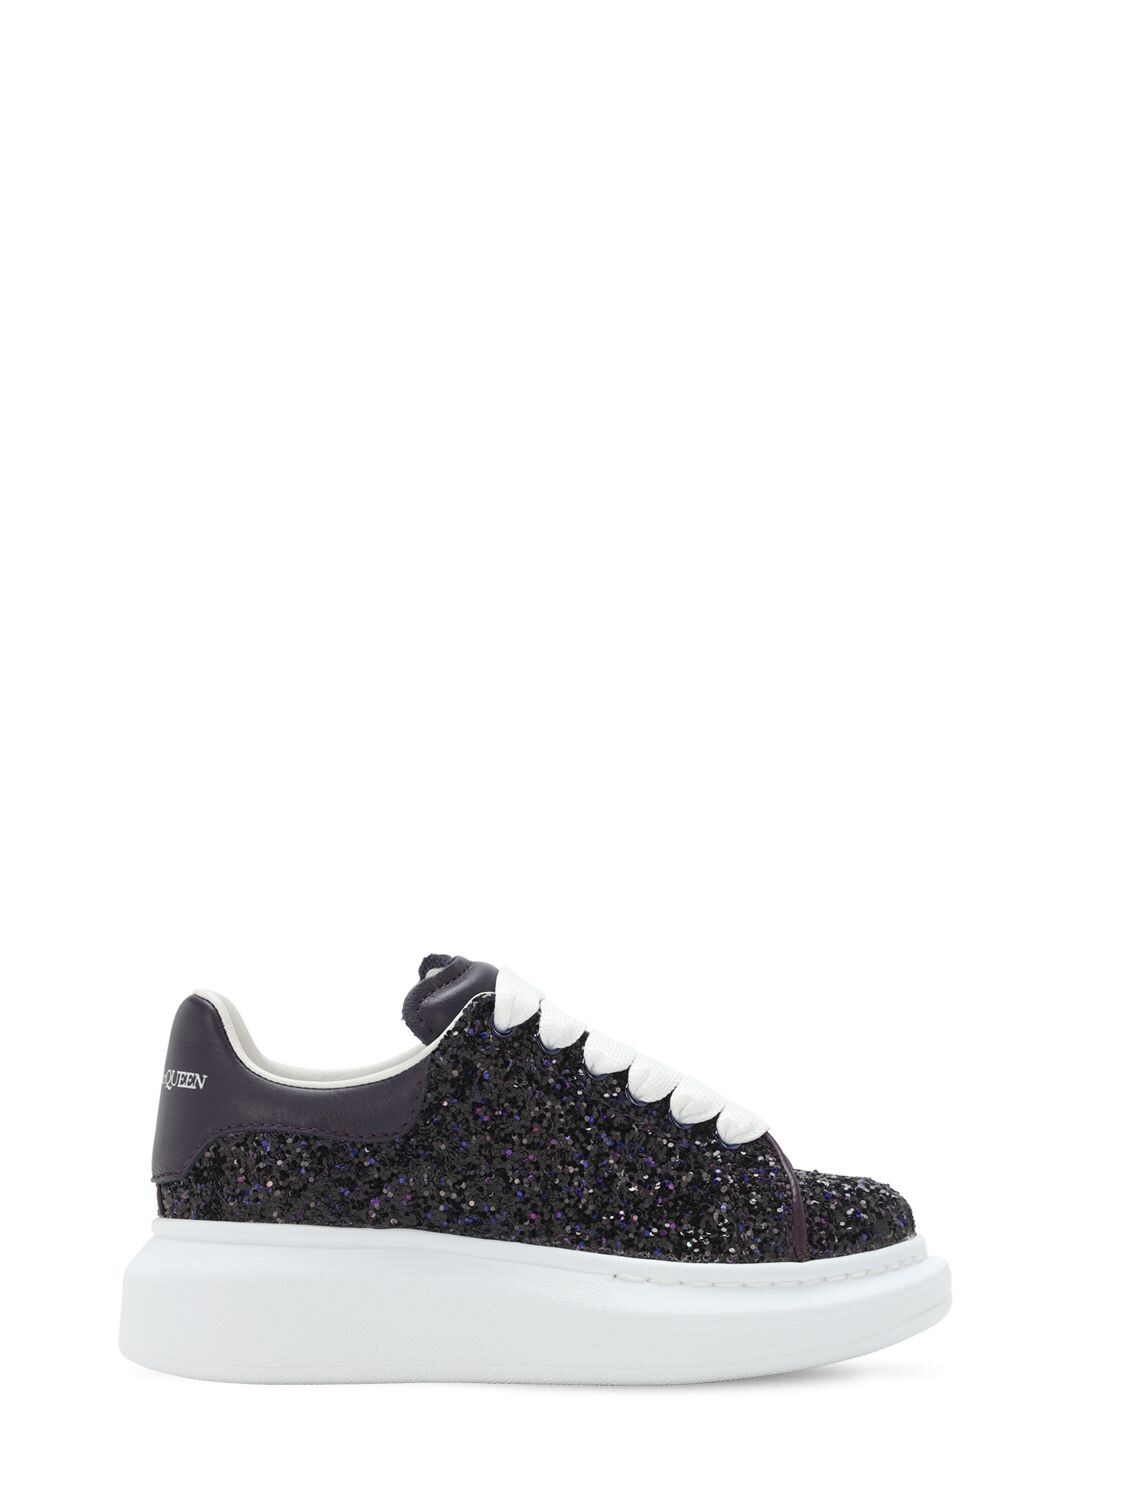 ALEXANDER MCQUEEN GLITTER & LEATHER LACE-UP trainers,72ILXS001-NTA2OA2